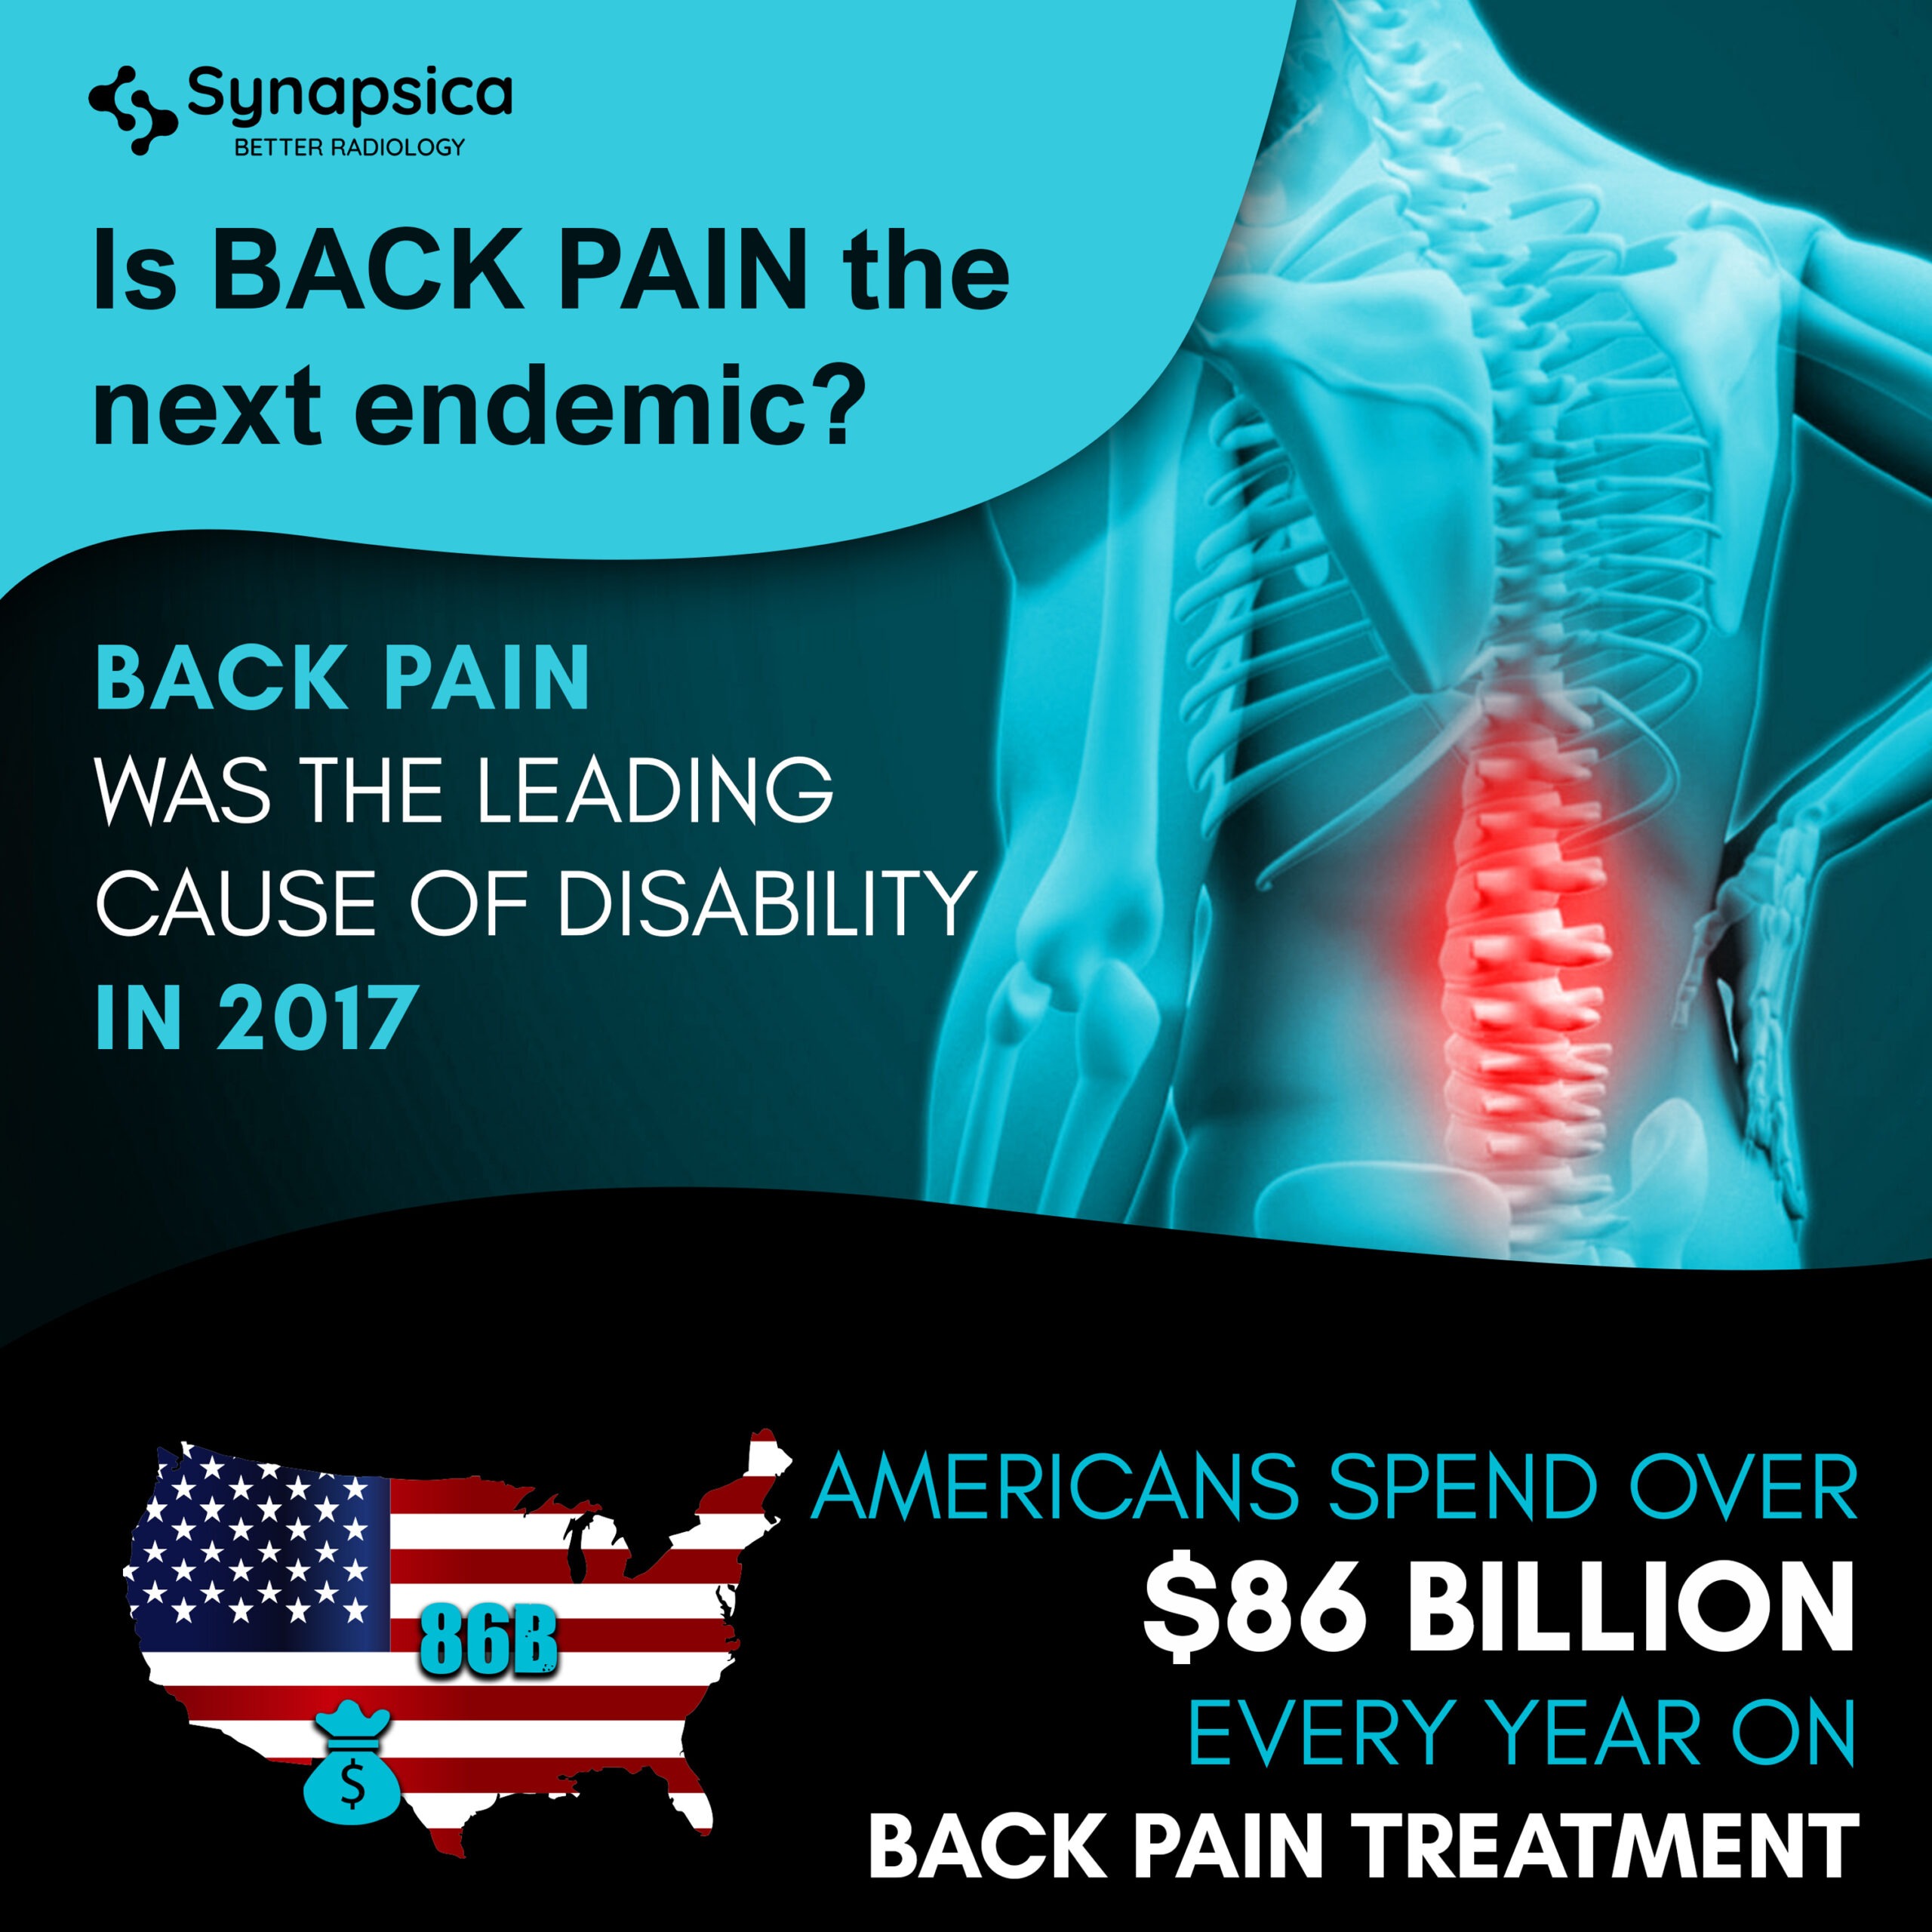 Is back pain going to be the next endemic?